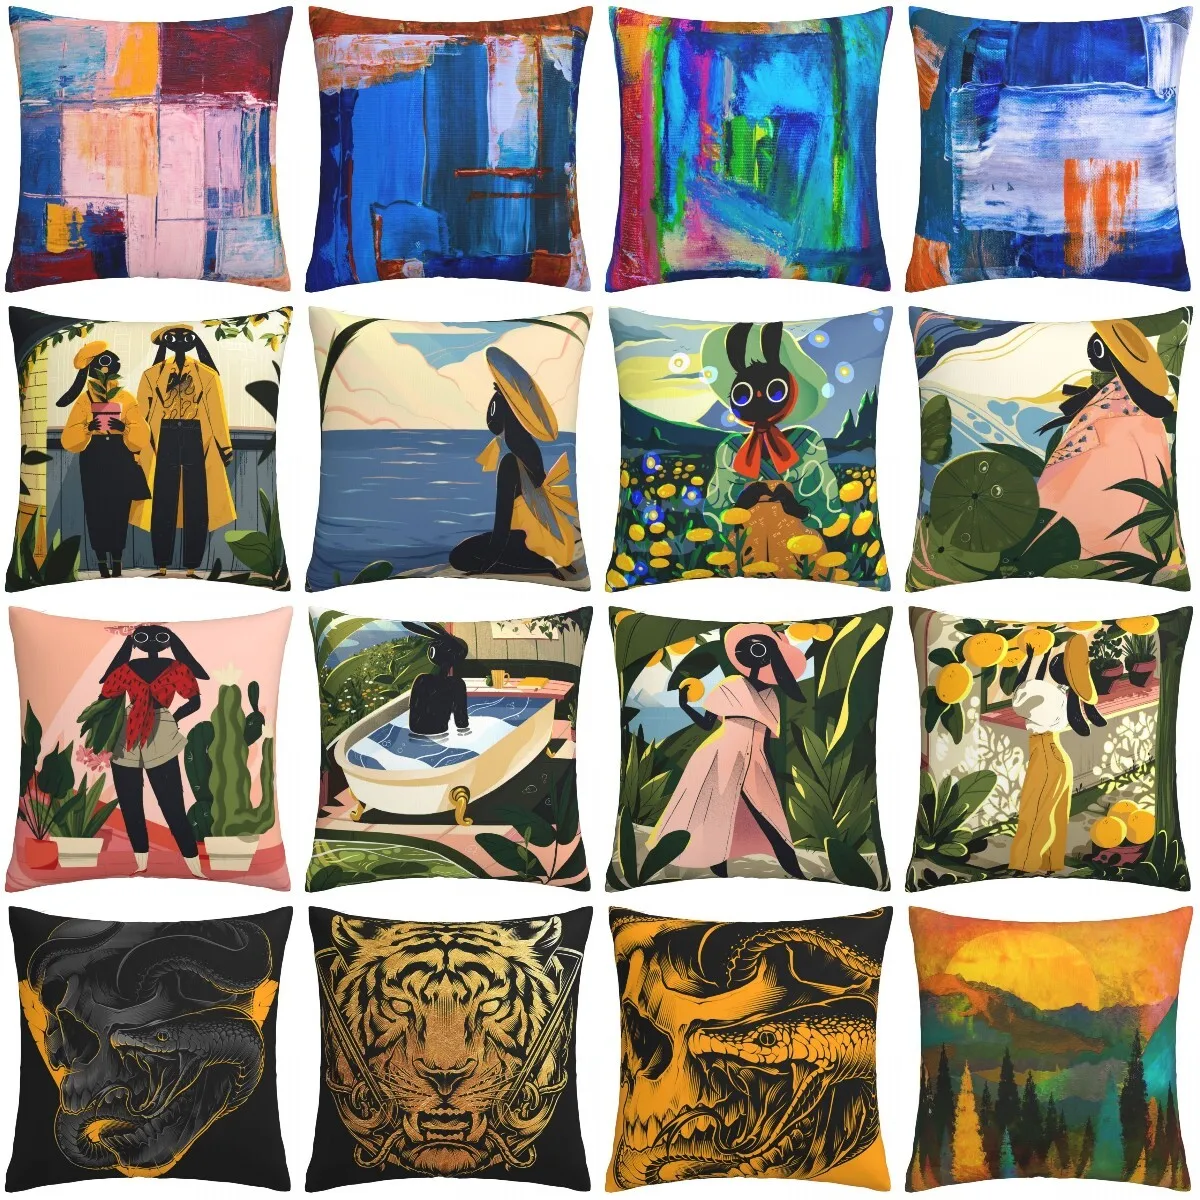 

Painting Illustration Style Hug Pillow Cases 40x40 Customizable DIY Printing Cushions Pillowcases for Pillows Decor Home Cover